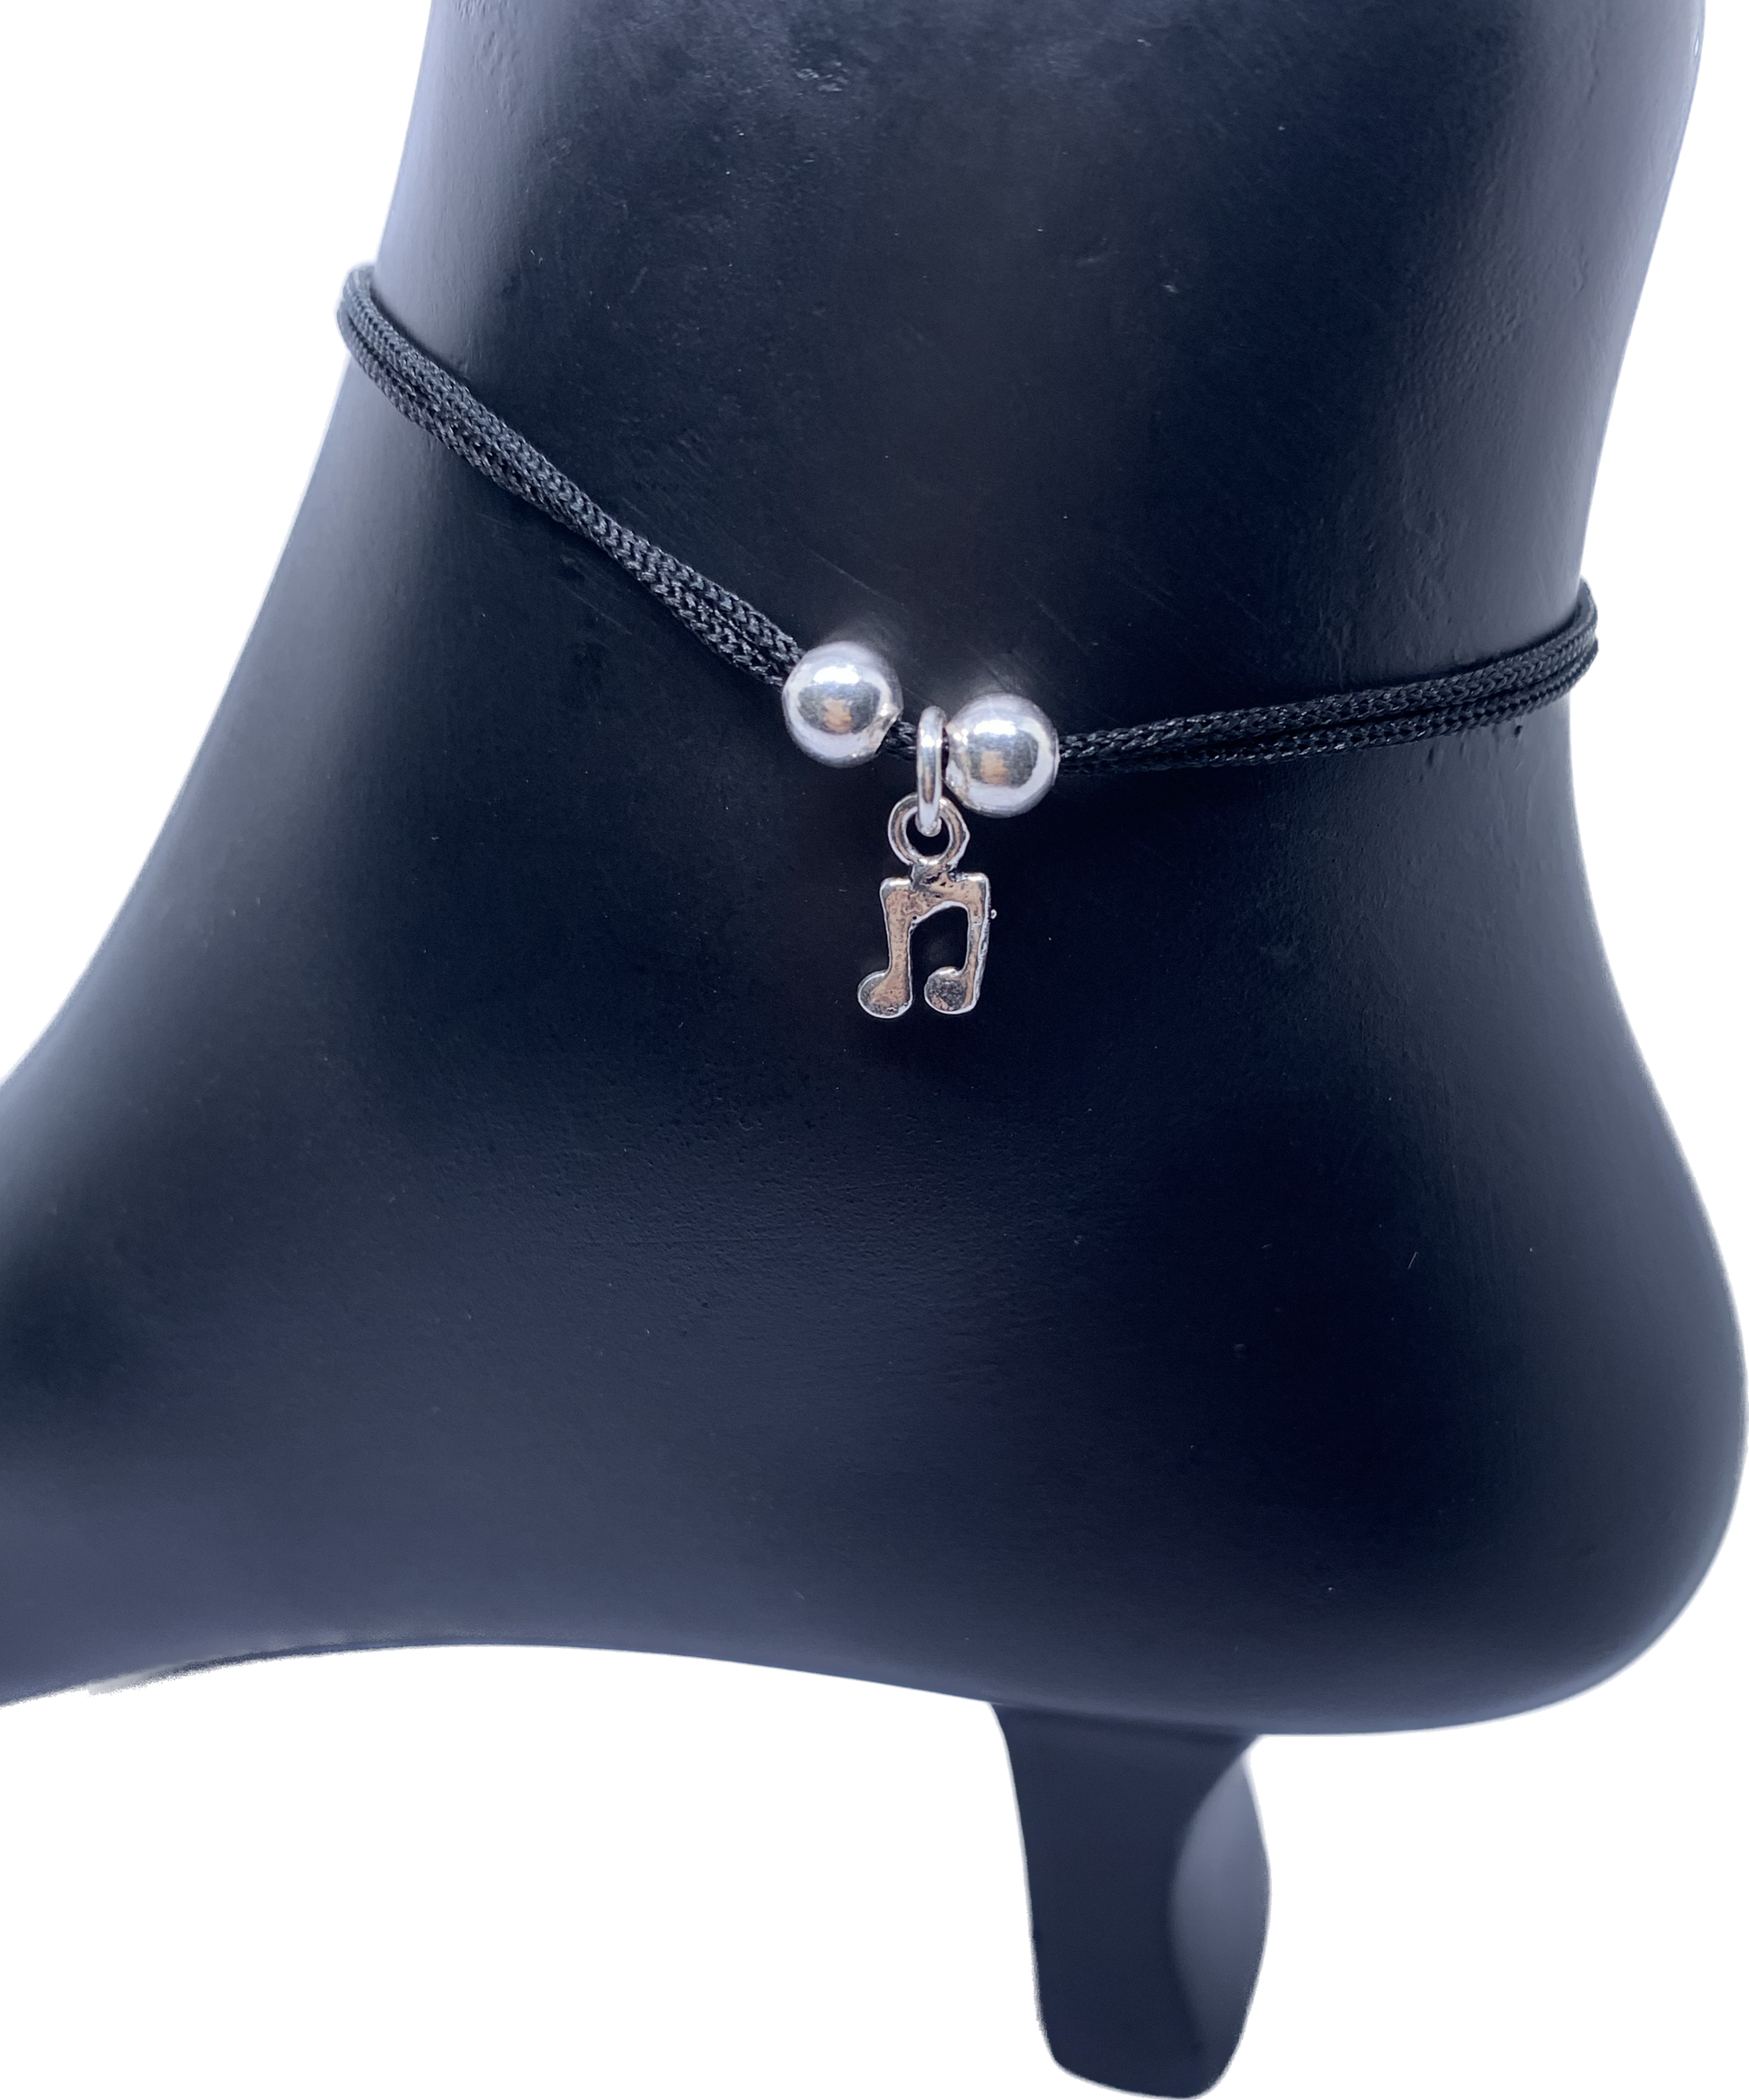 Black Thread Music Silver Anklet Adjustable - Silver Jewelery 925